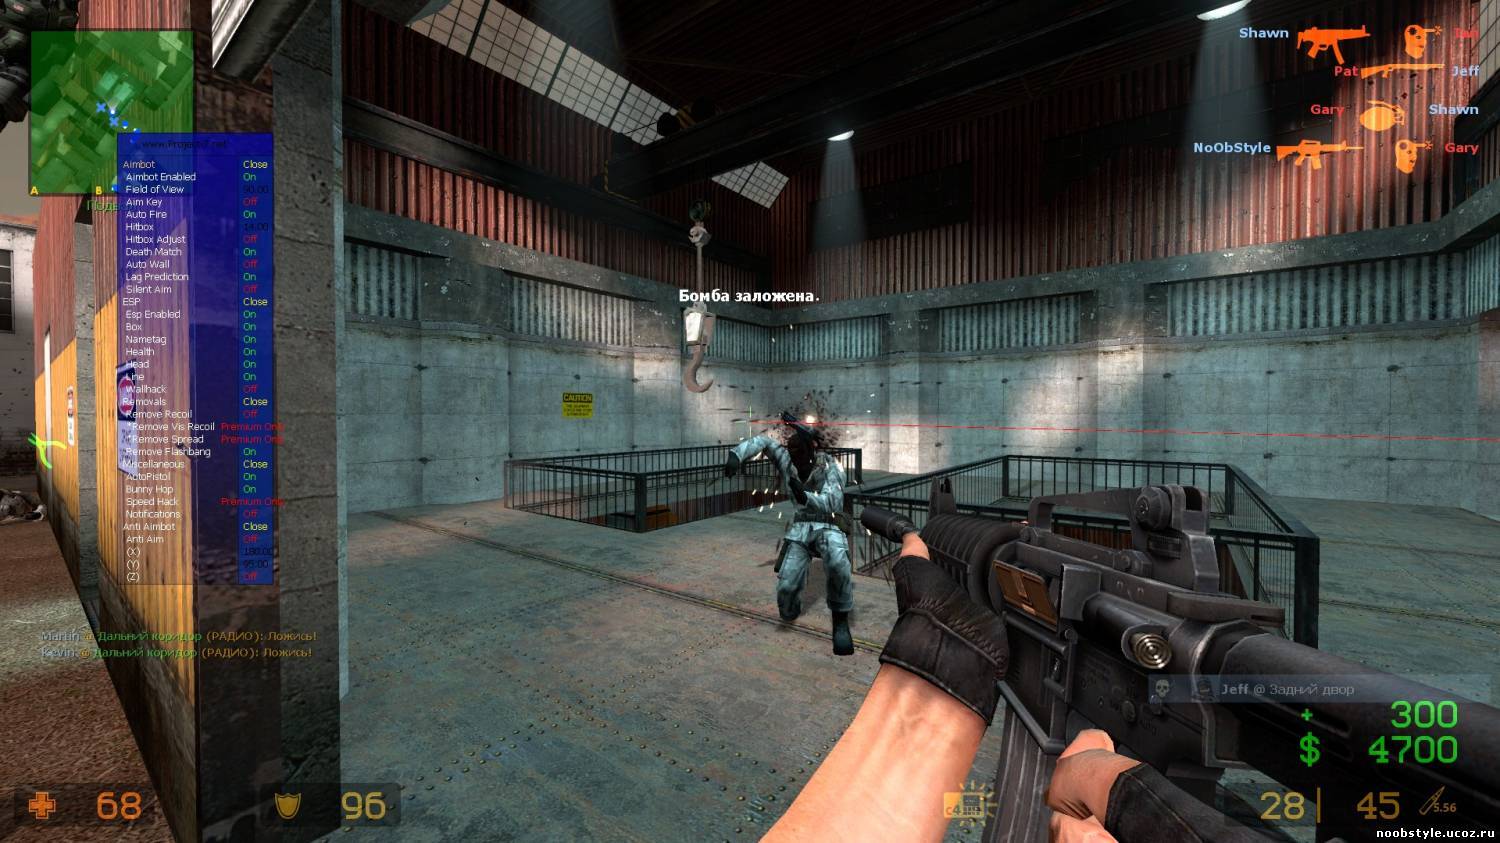 Counter Strike source Trainer Cheat. Aim of profect. Project aims. Project aim